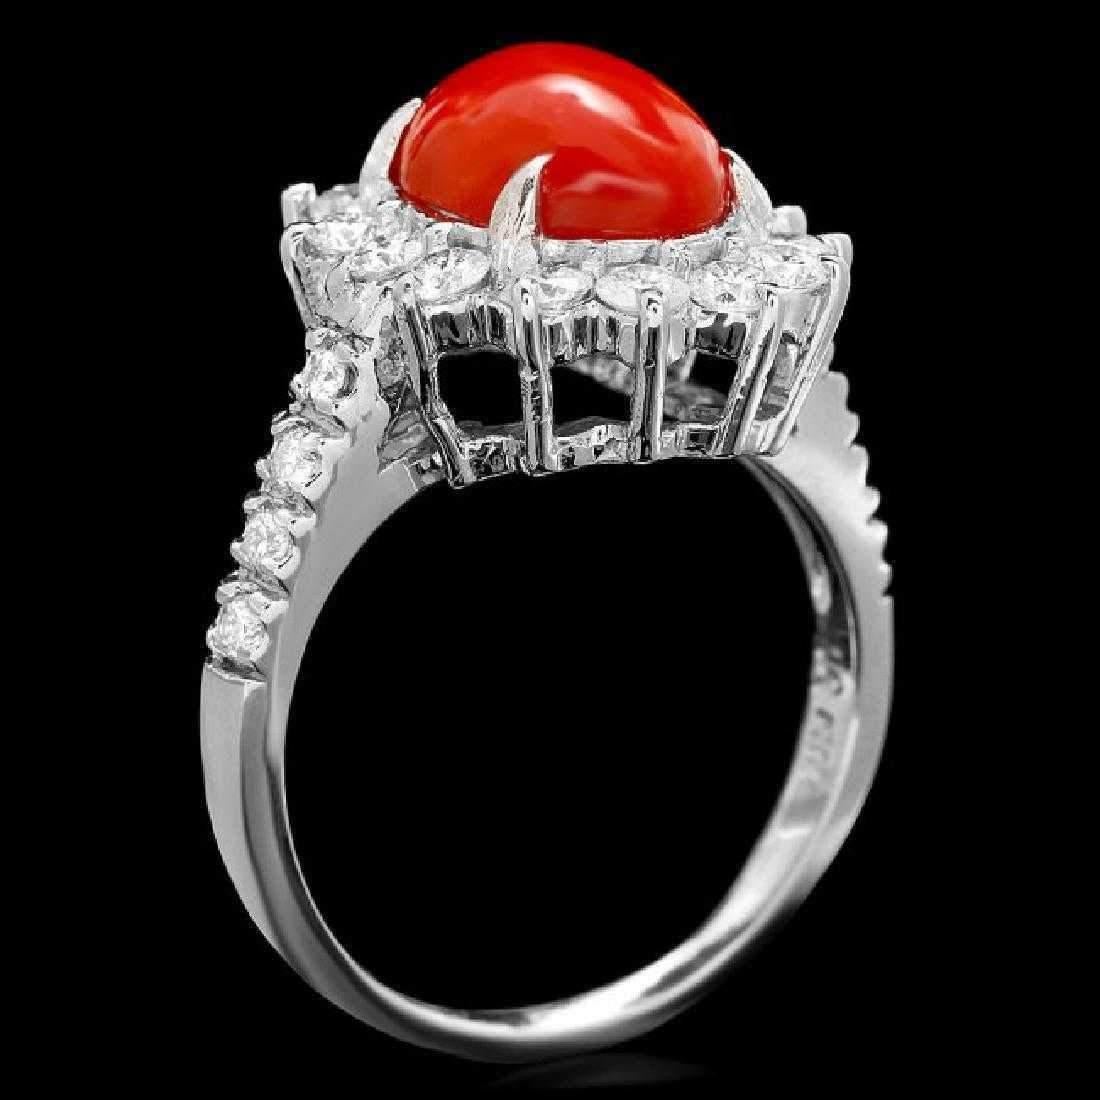 3.45 Carats Impressive Coral and Diamond 14K White Gold Ring

Total Natural Oval Coral Weight is: Approx. 2.50 Carats

Coral Measures: Approx. 10.00 x 8.00mm

Natural Round Diamonds Weight: Approx. 0.95 Carats (color G-H / Clarity SI1-SI2)

Ring